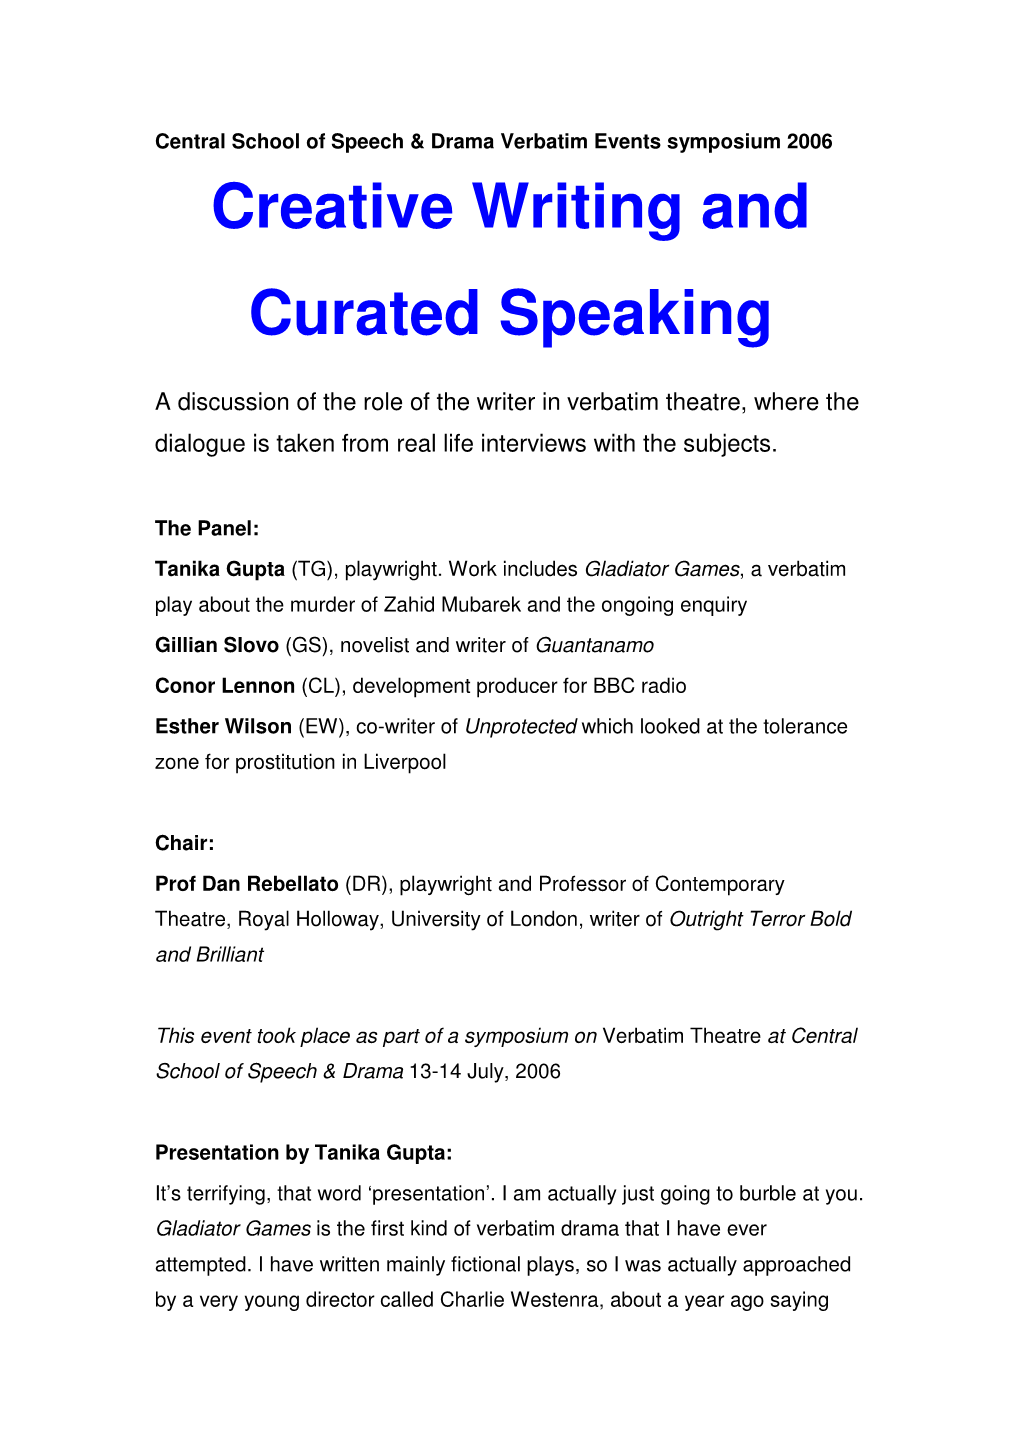 Creative Writing and Curated Speaking